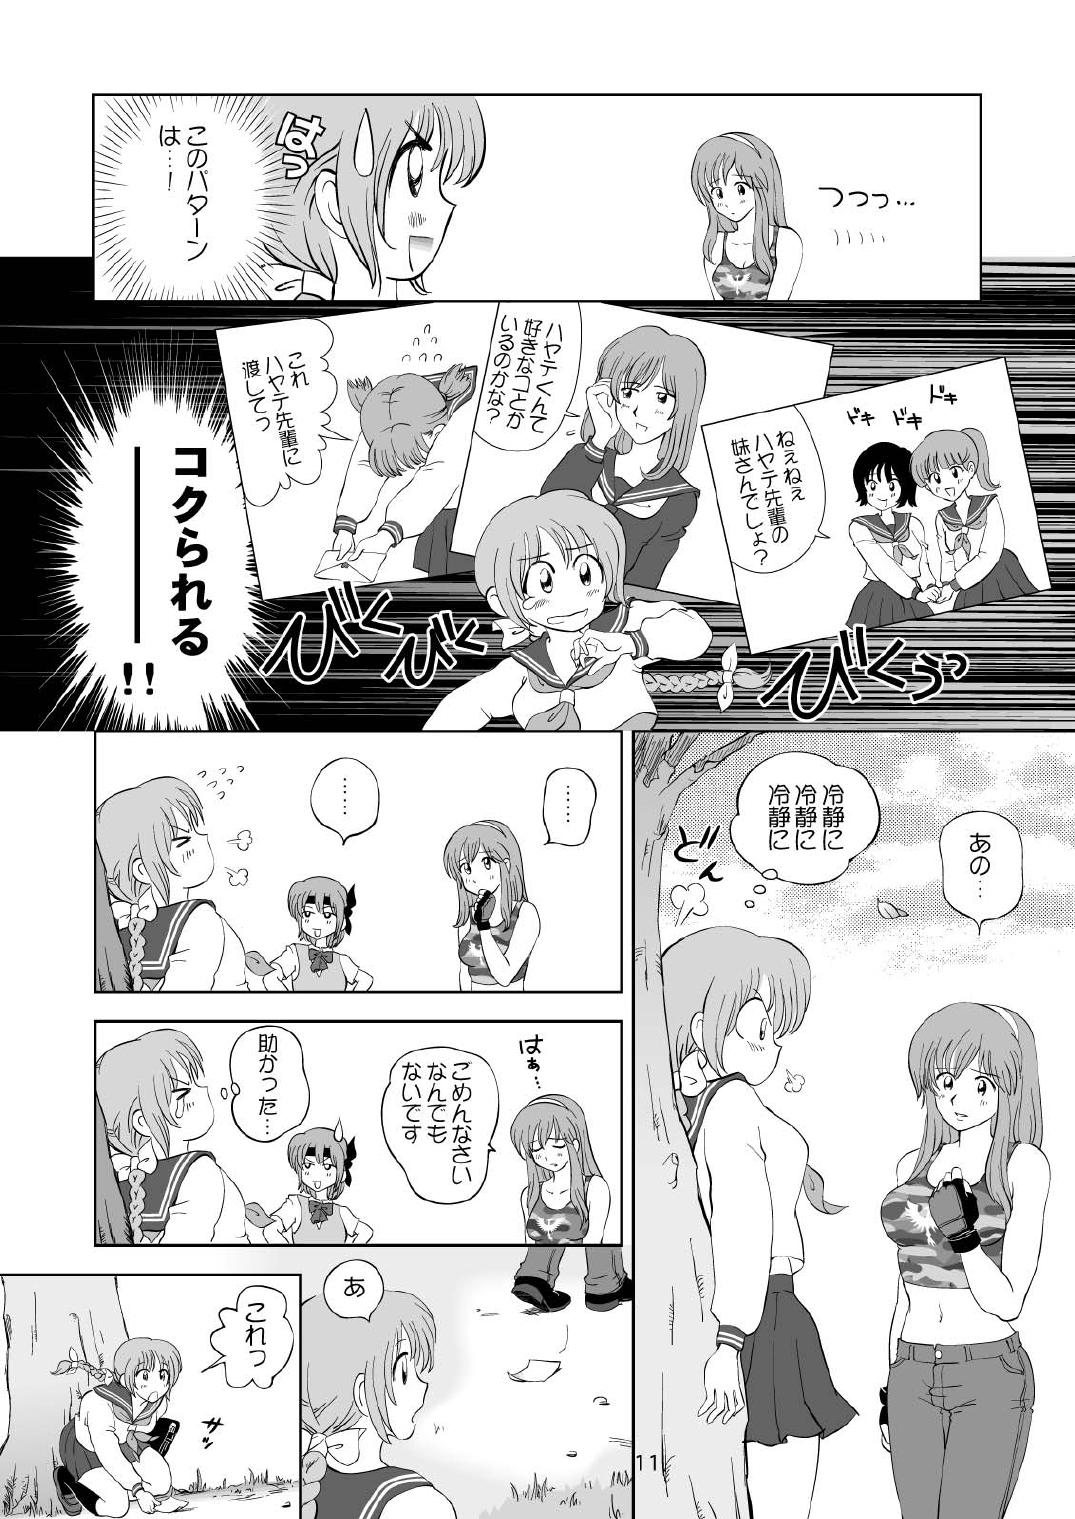 Free Blowjobs Sugoiyo!! Kasumi-chan 3 - Dead or alive Pay - Page 11